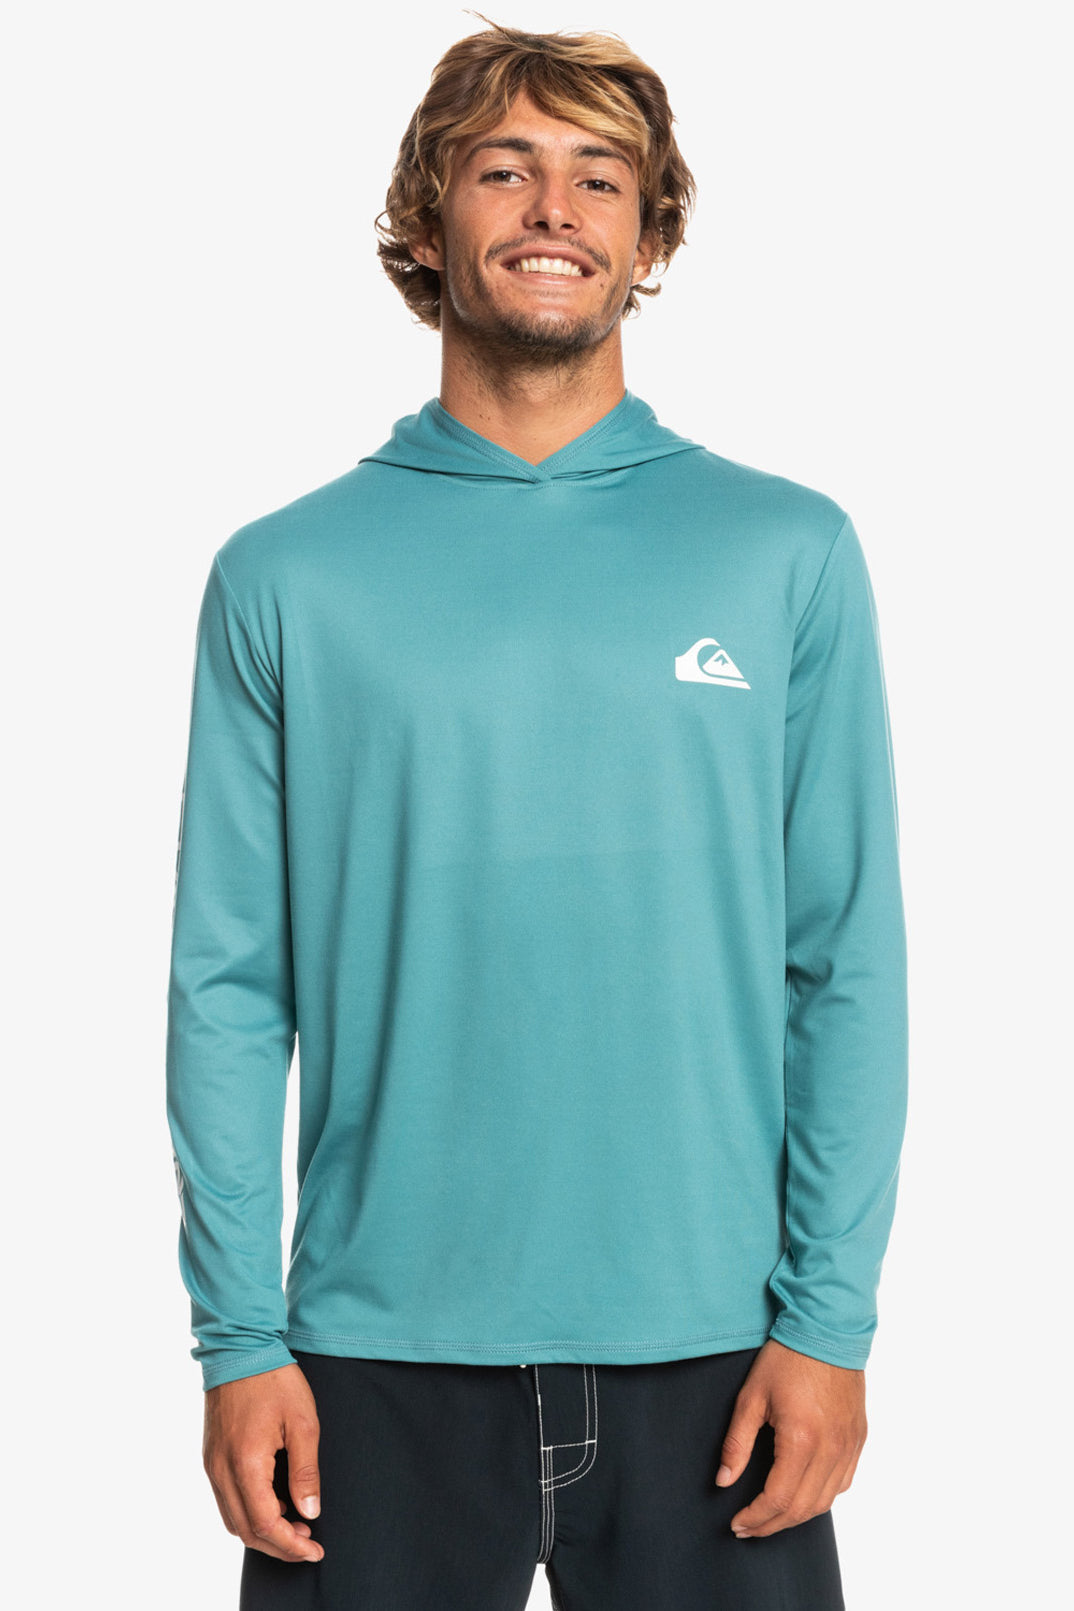 Quiksilver: Omni Session UPF 50 Long Sleeve Hooded Surf Tee